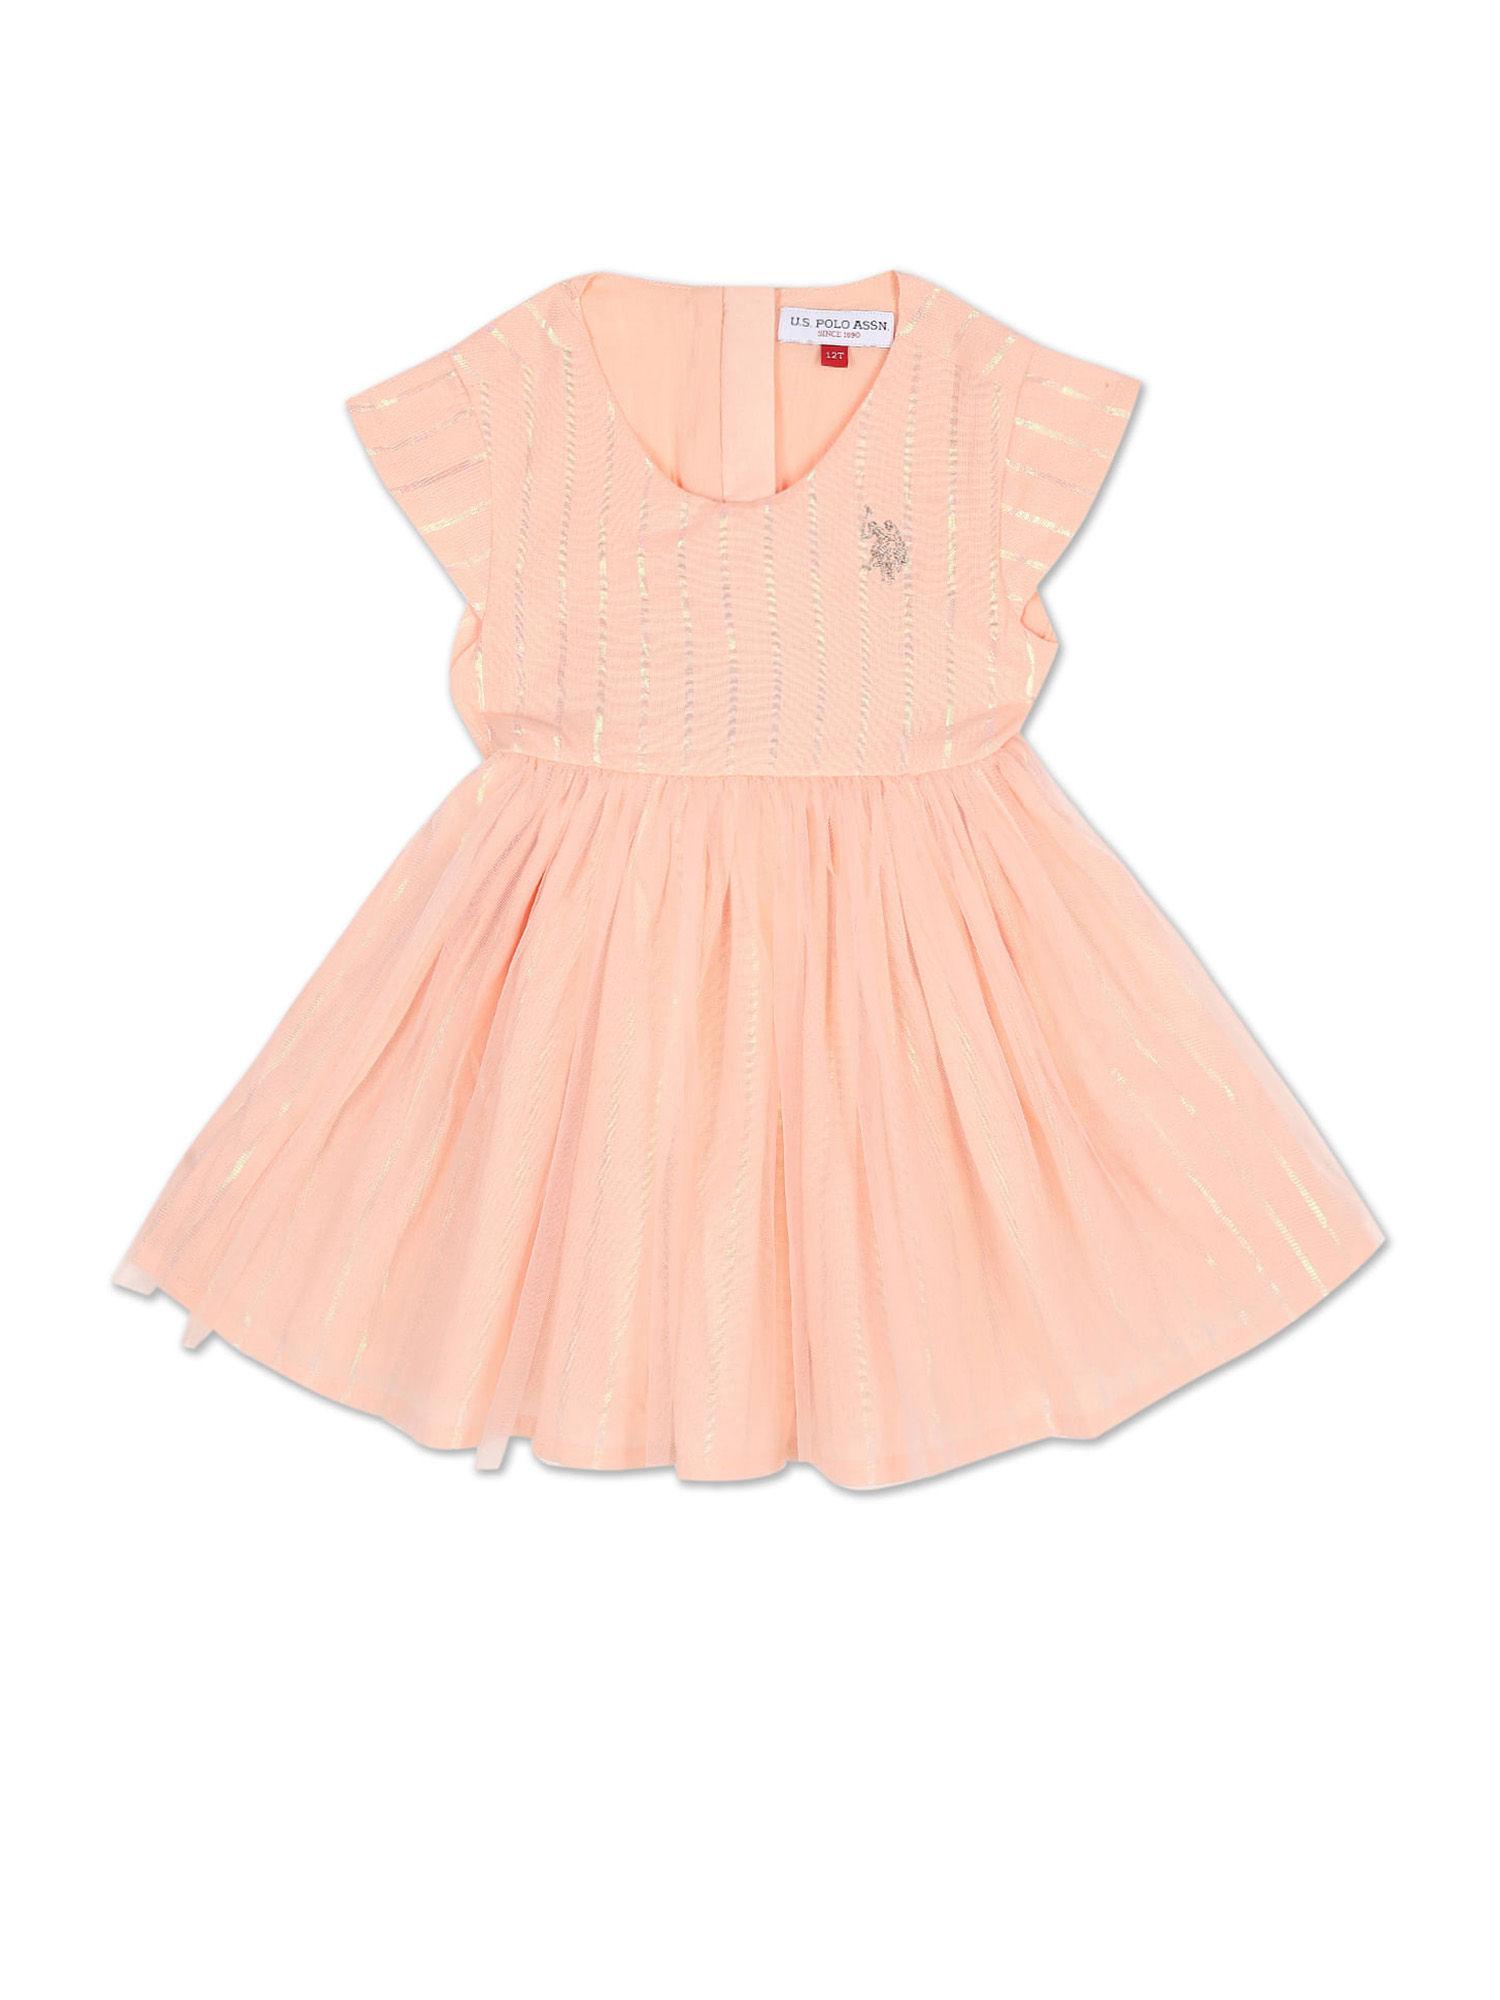 girls peach cap sleeve stripes fit and flare dress